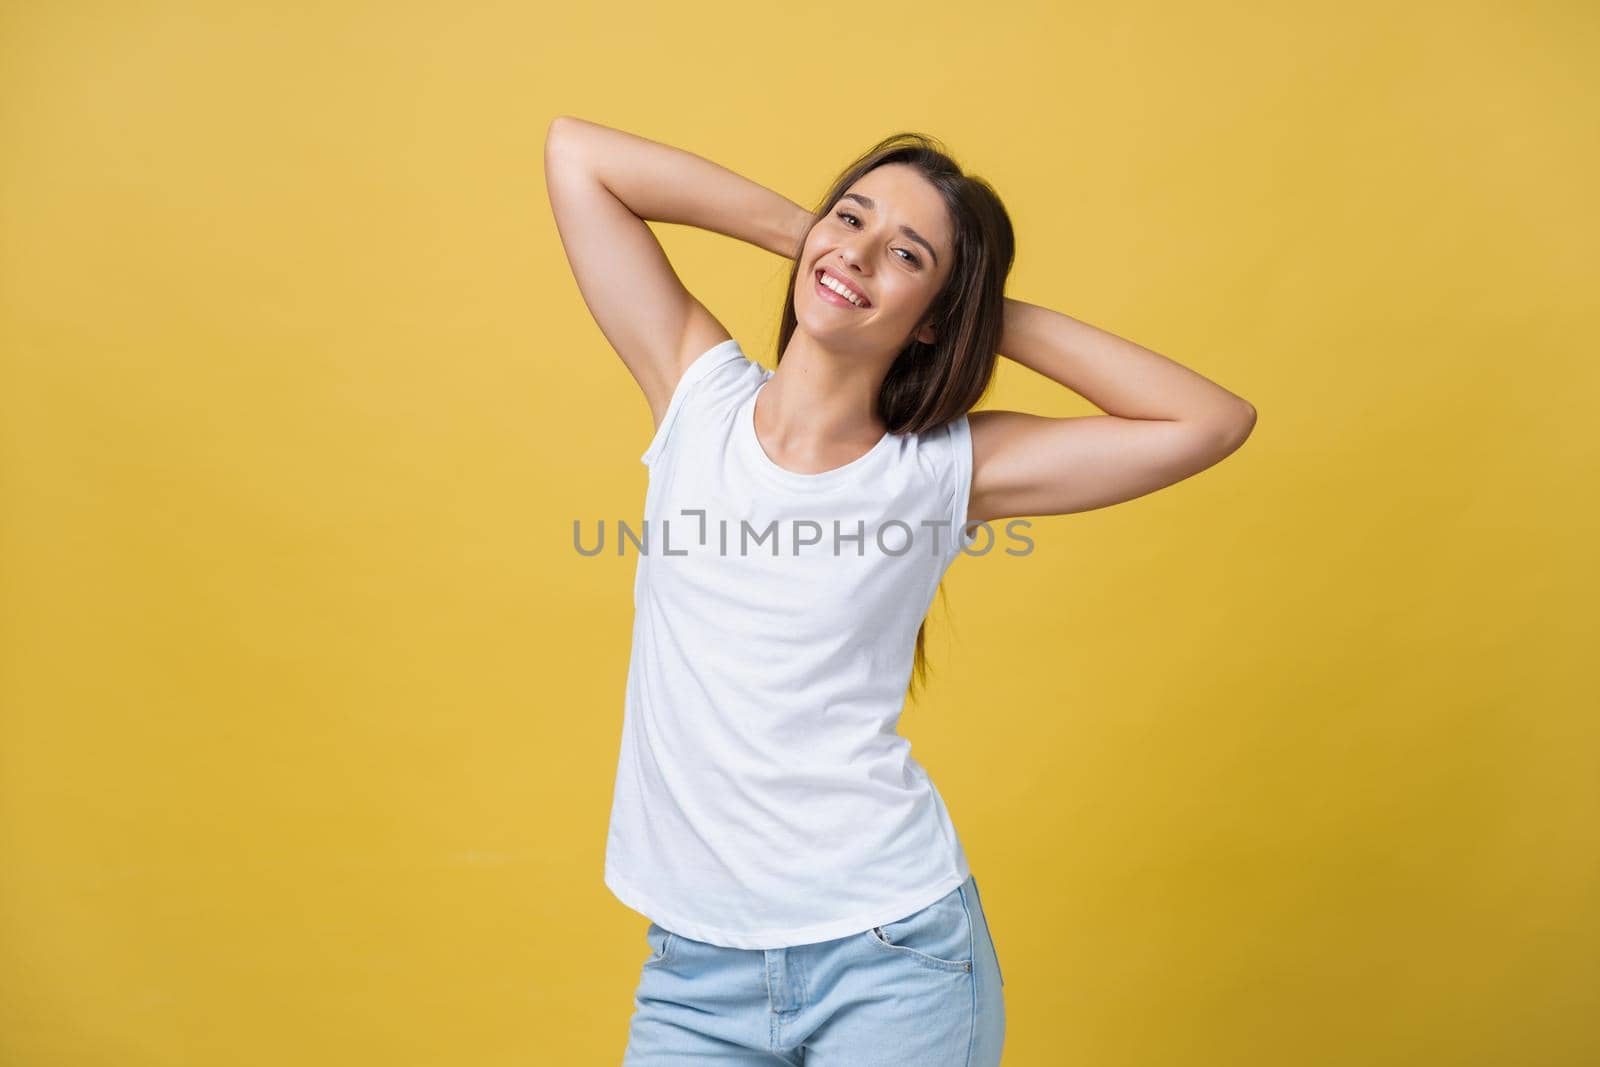 Close-up portrait of cute young woman relaxing with hand behind head. Isolated over yellow background